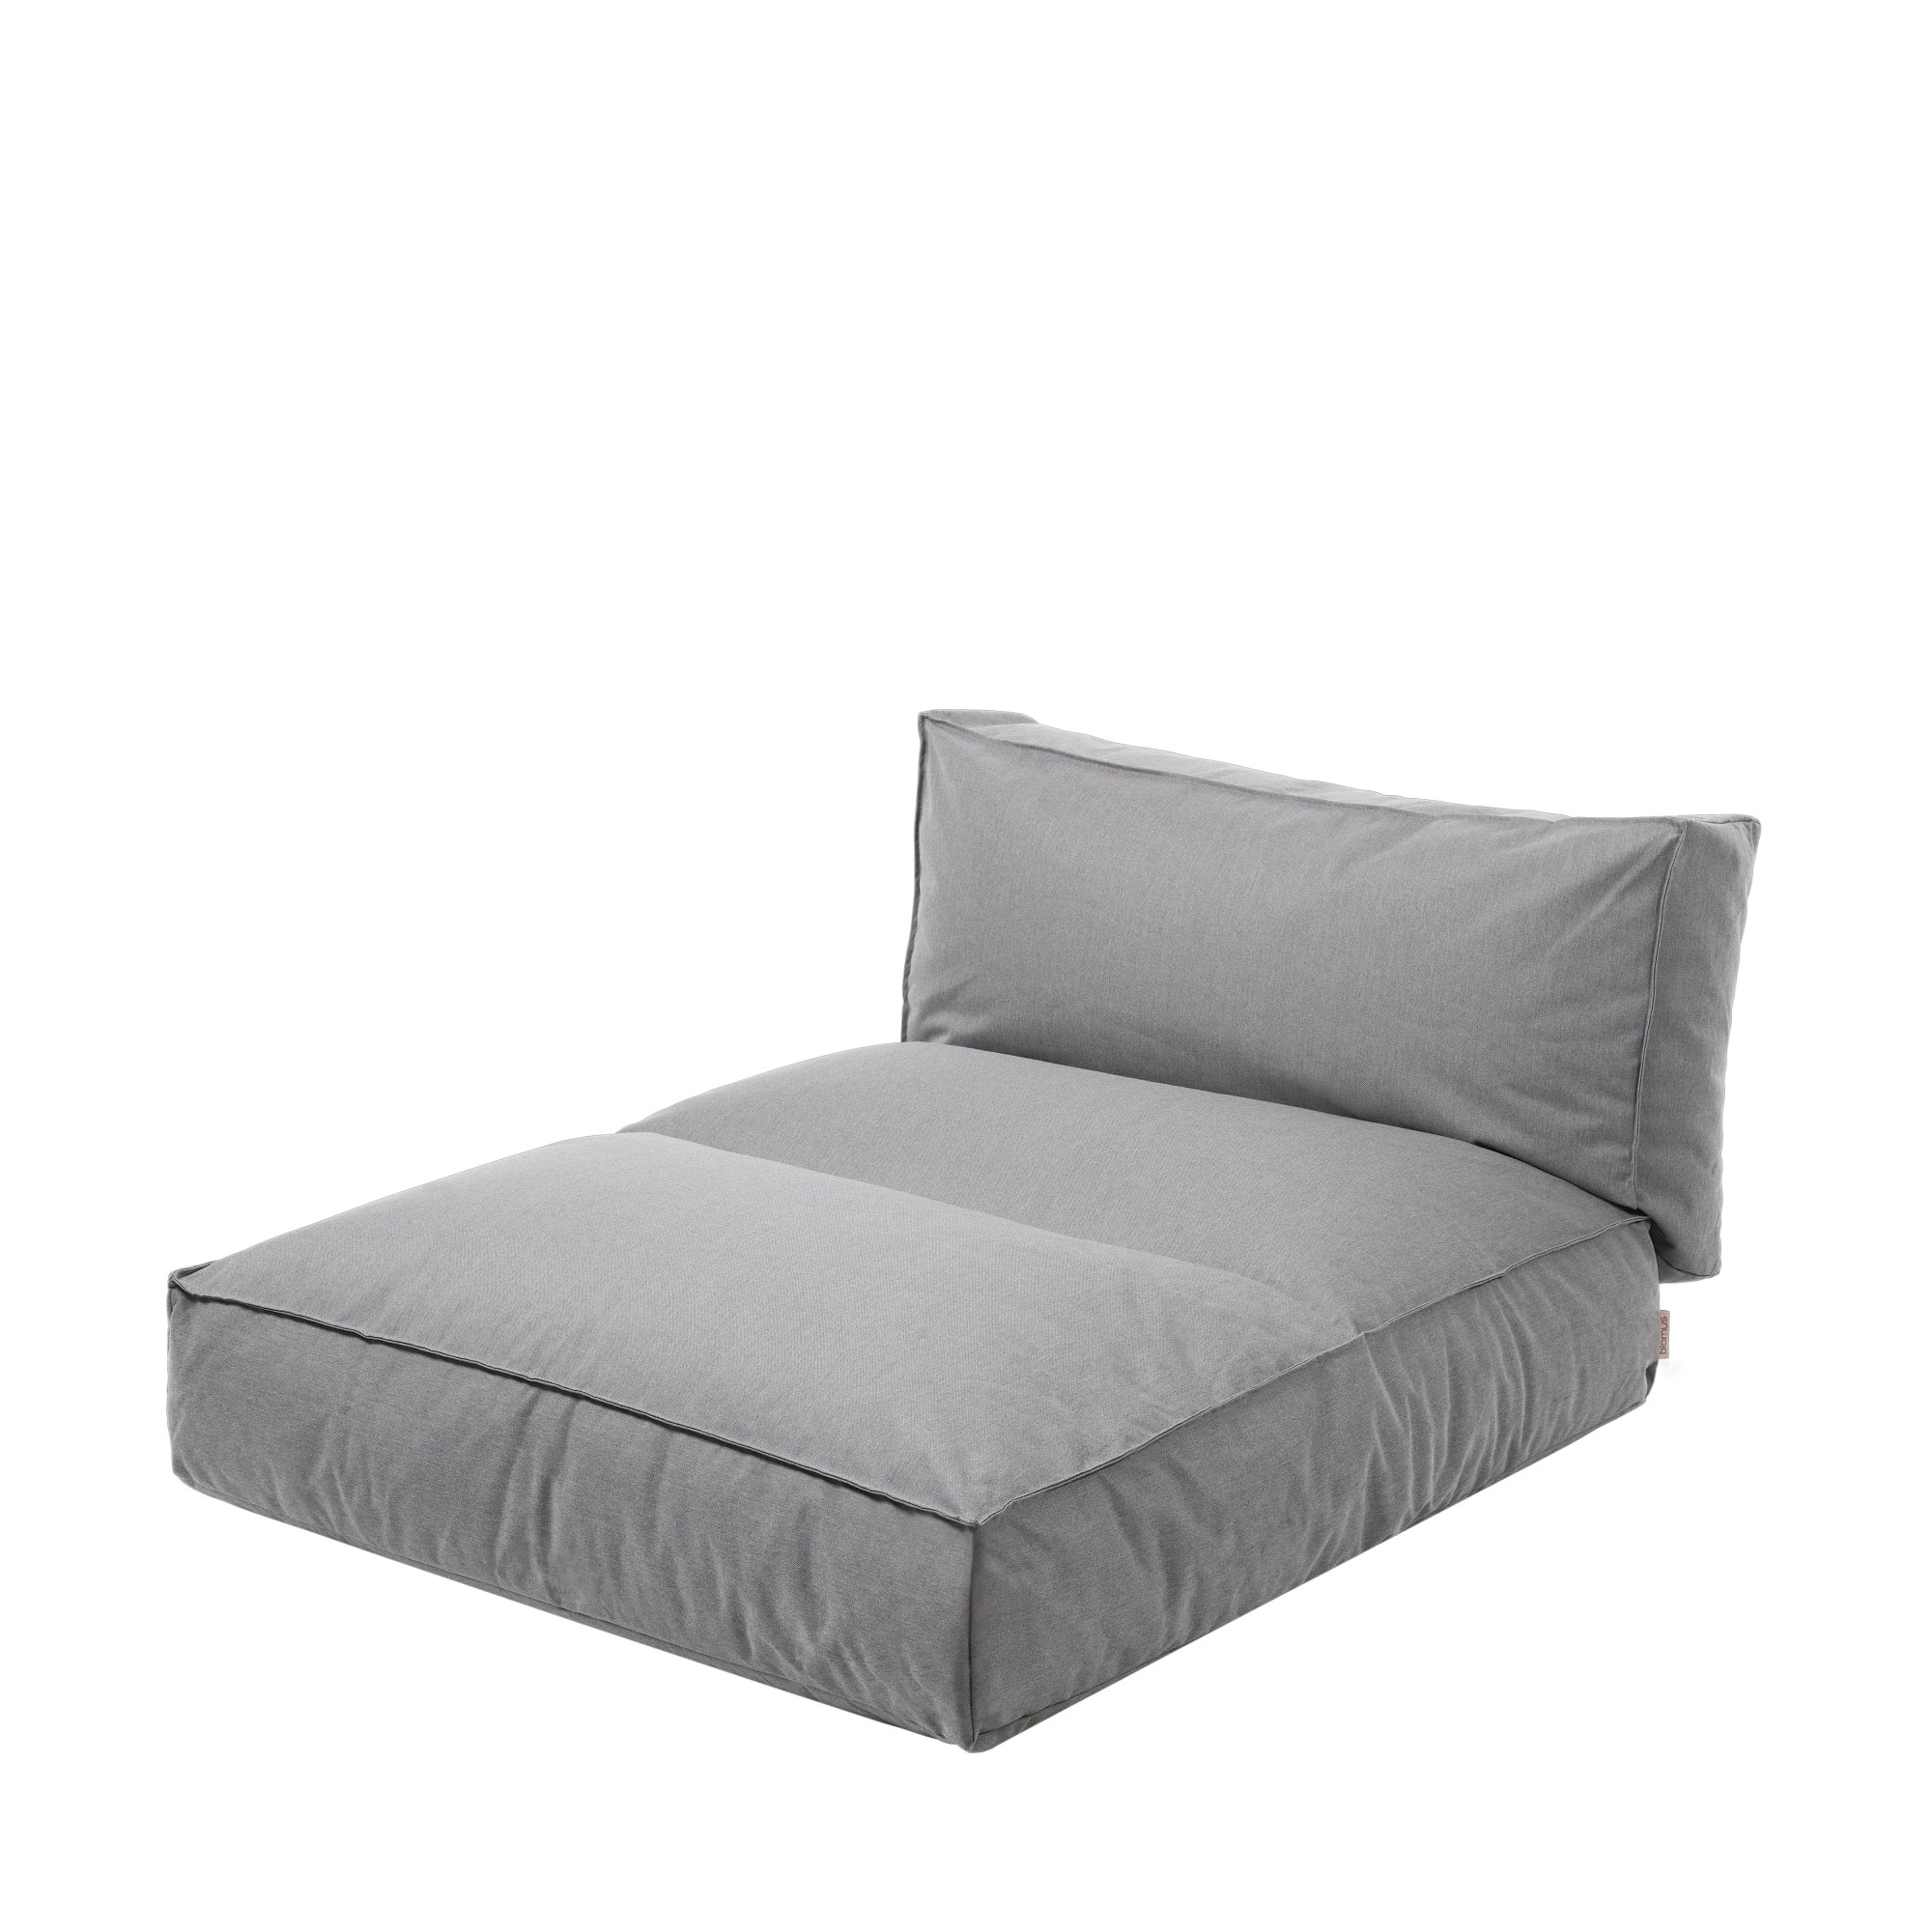 BLOMUS // STAY - OUTDOOR BED | 120 x 190 cm | STONE